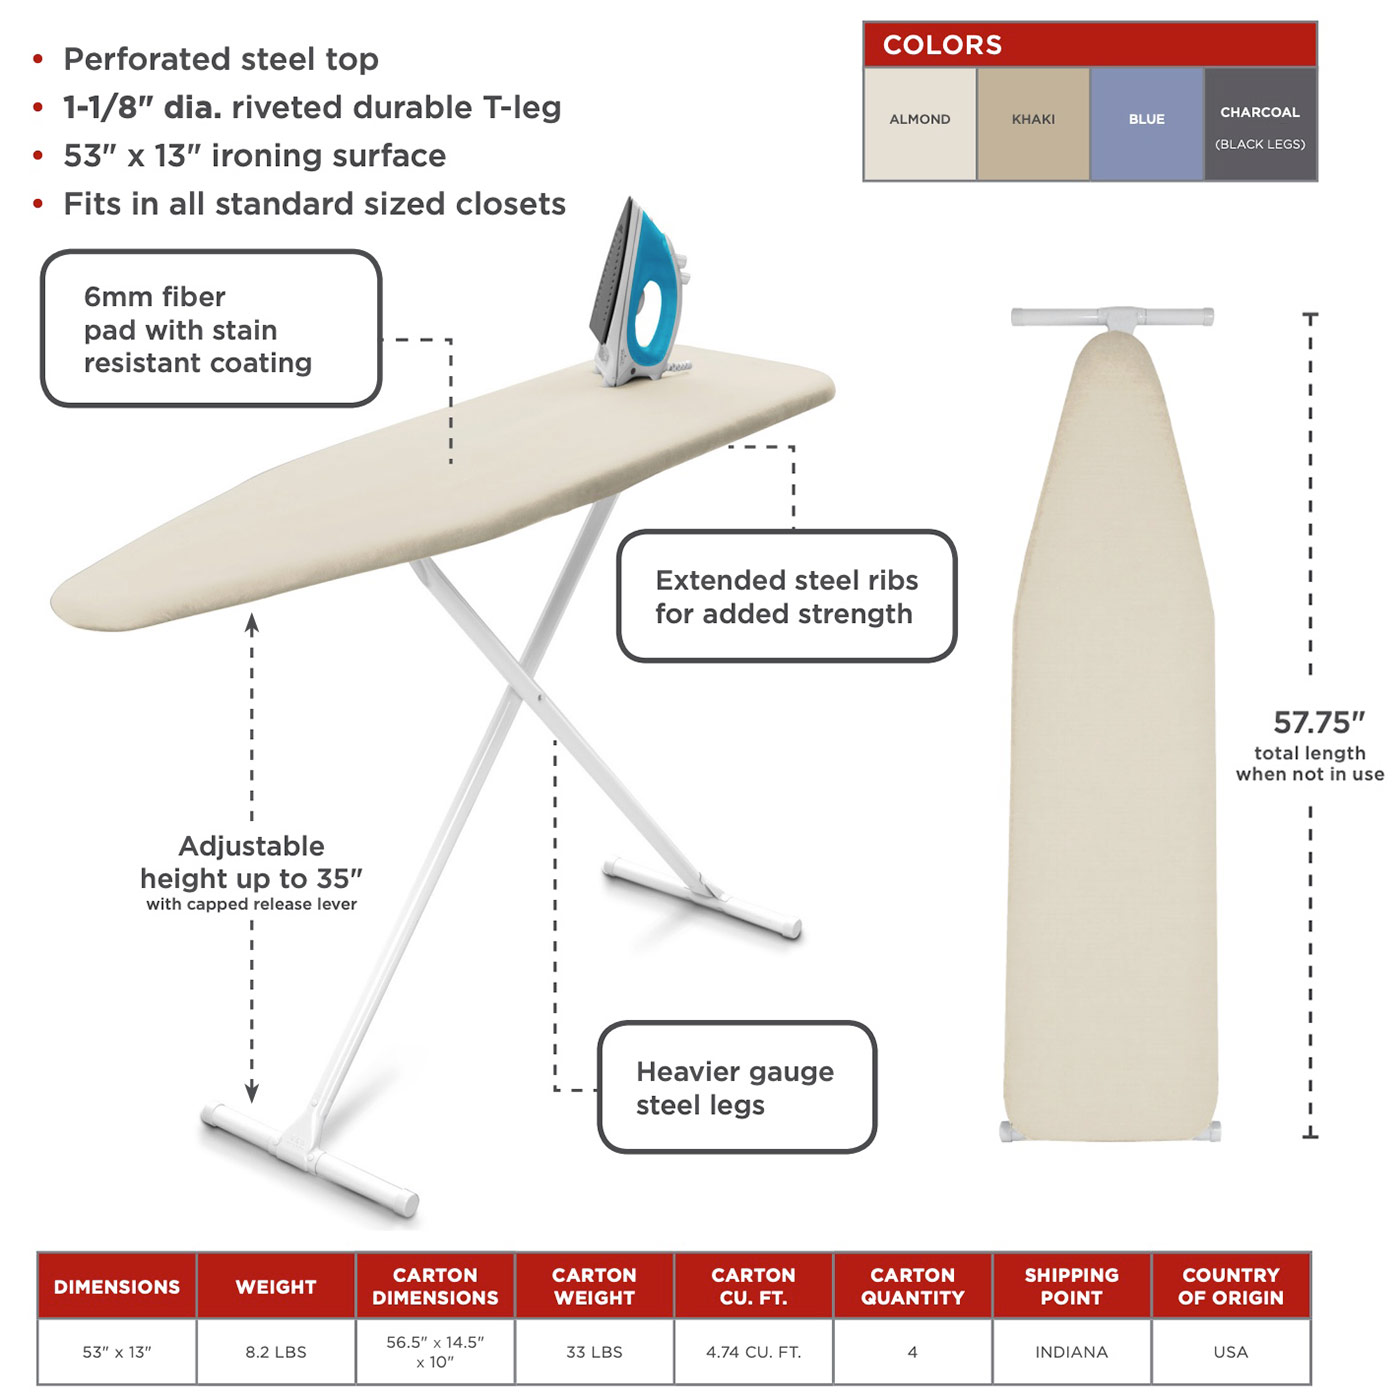 Details about   HOMZ EASYBOARD IRONING BOARD 4831146 WITH PAD AND COVER KHAKI-LOT OF 4 